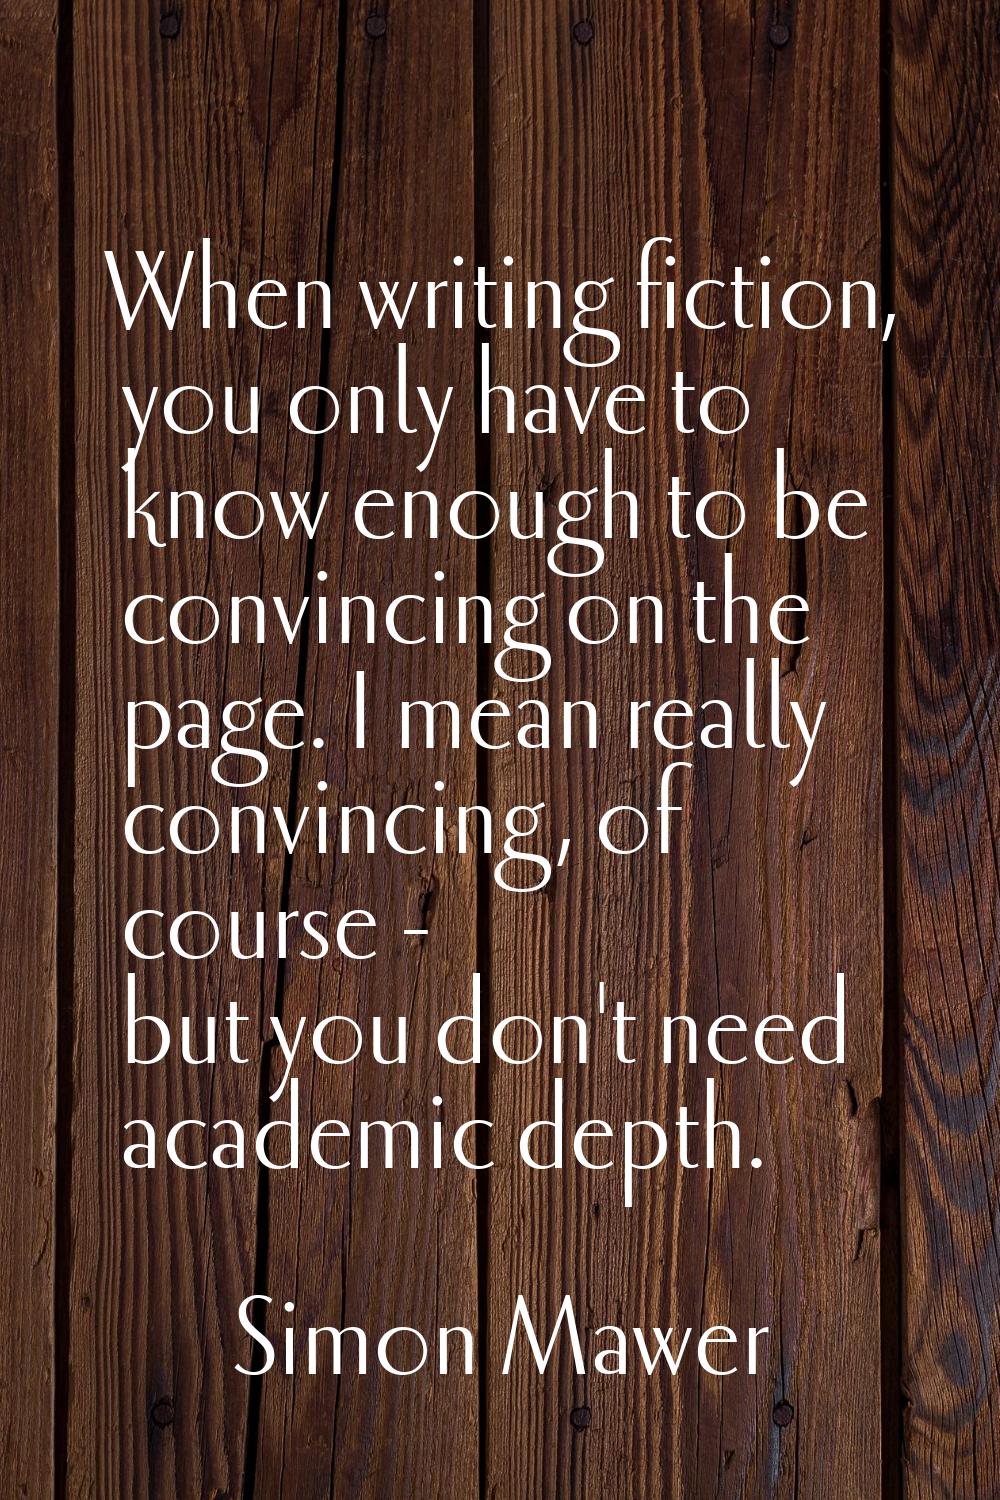 When writing fiction, you only have to know enough to be convincing on the page. I mean really conv